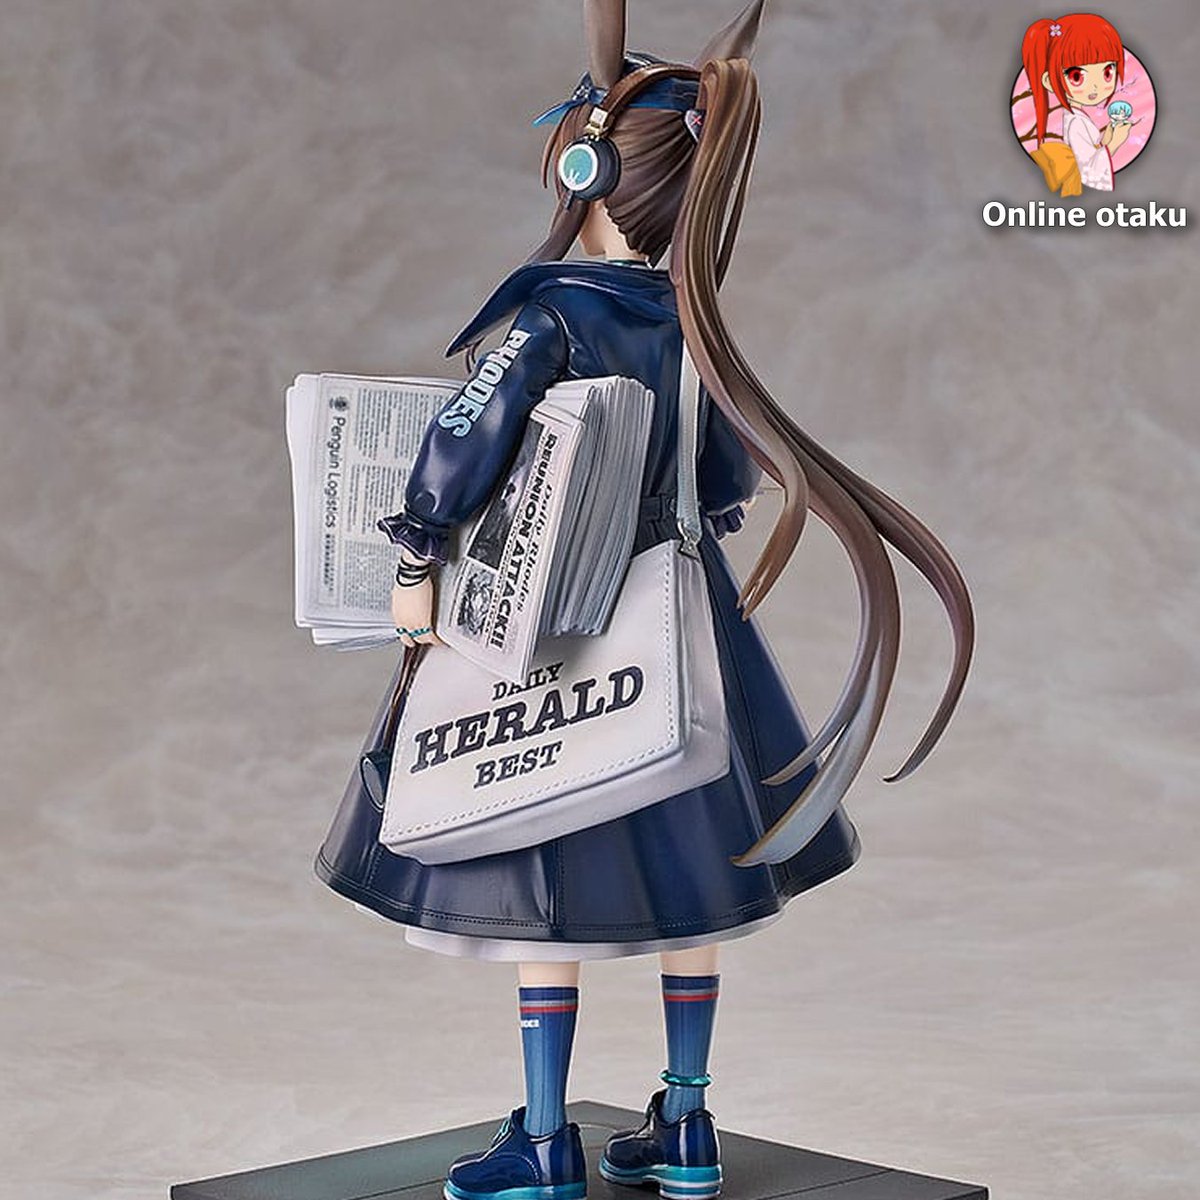 📰 Dive into the world of Arknights with our PVC Statue of Amiya in her Newsgirl Ver outfit! Order now and bring this dynamic figure to your collection: online-otaku.com/en/shop/item/2… #Arknights #Amiya #NewsgirlVer #OnlineOtaku #AnimeFigure #FigureCollection